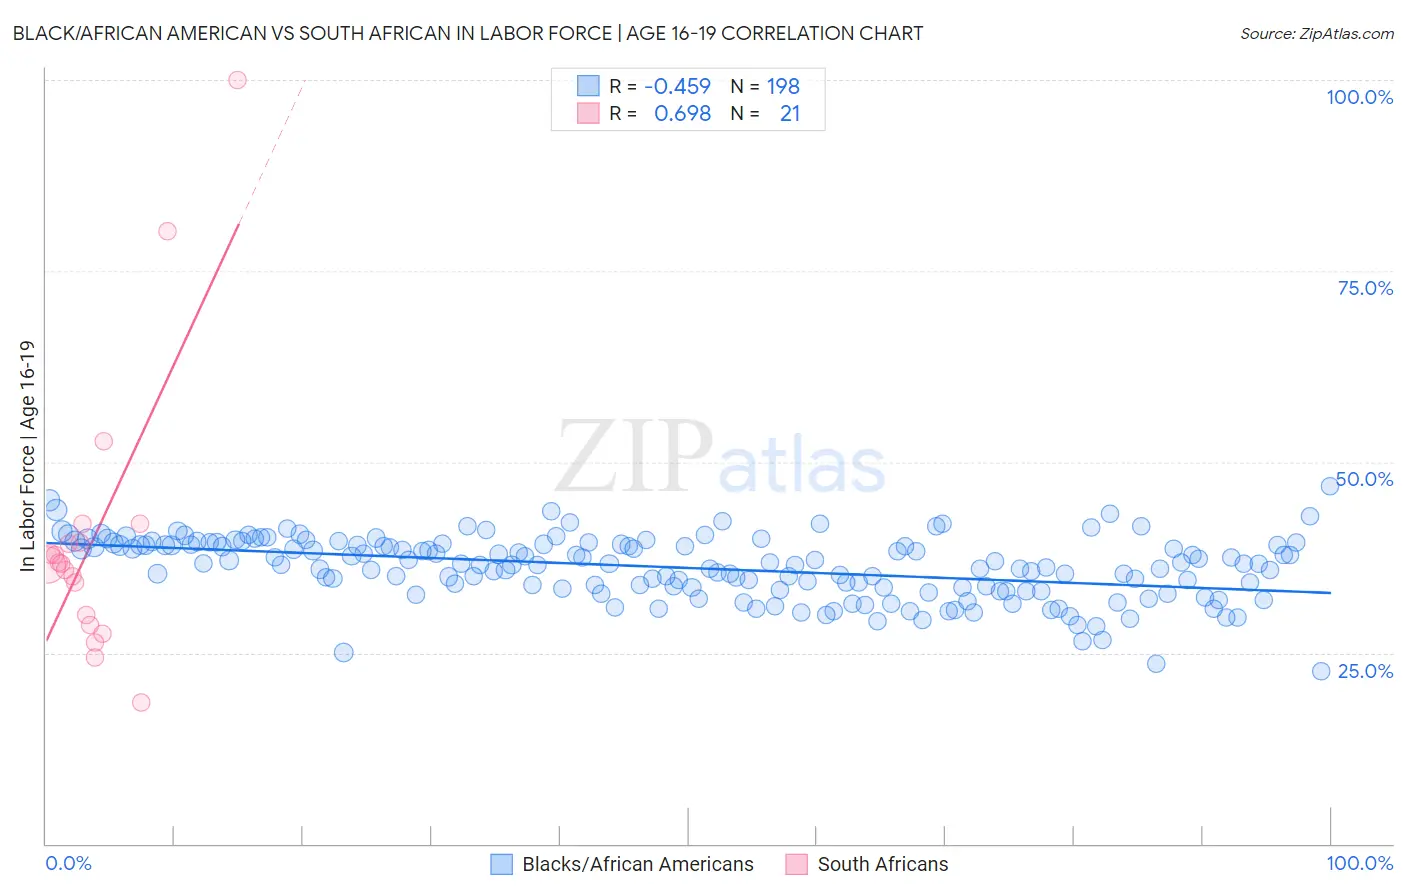 Black/African American vs South African In Labor Force | Age 16-19